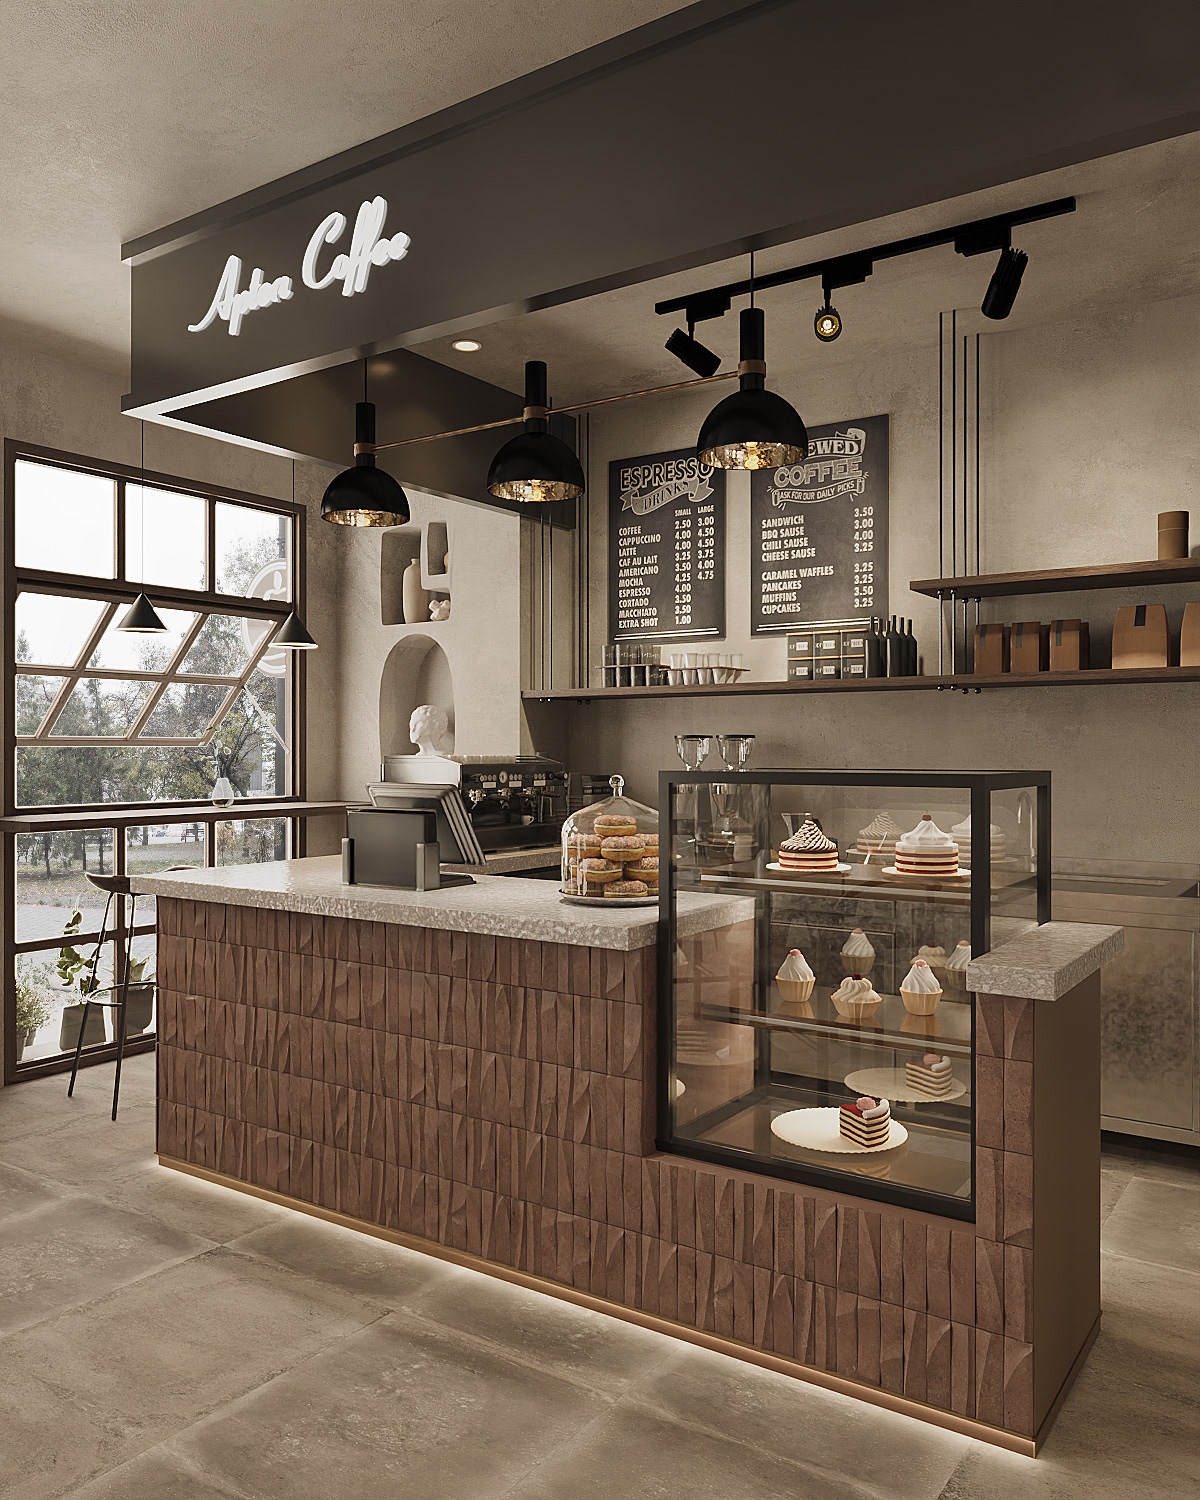 3ds max cafe Cafe design Coffee coffee shop interior design  Render small small coffee shop